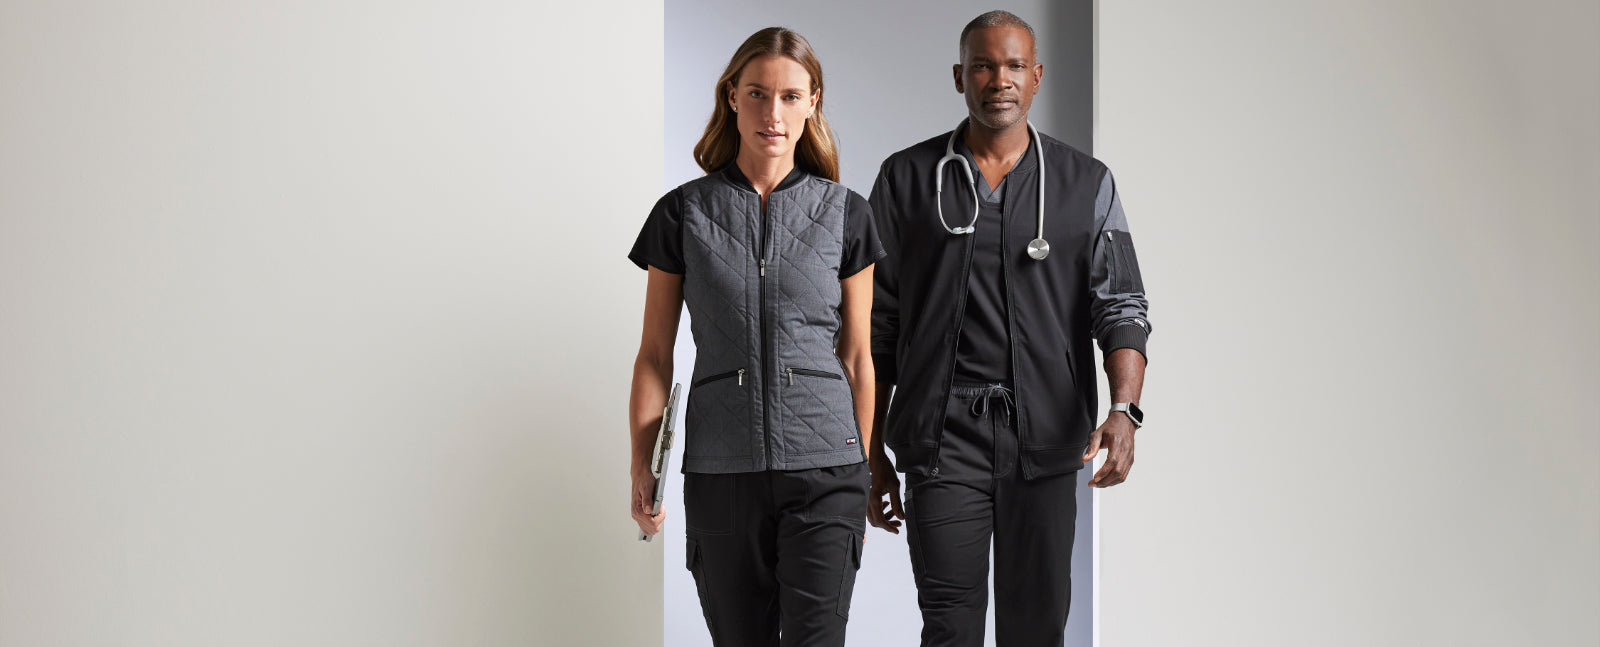 Two healthcare professionals, a woman on the left and a man on the right, confidently model the latest in medical scrubs from 'The Uniform Store'. The woman is wearing a fitted, quilted vest over her scrubs, while the man dons a sleek, black zippered jacket atop his. They both carry stethoscopes, symbolizing their readiness to serve. Text overlay reads 'Healthcare Apparel Experts - Join the community of healthcare heroes who trust our scrubs and coats.